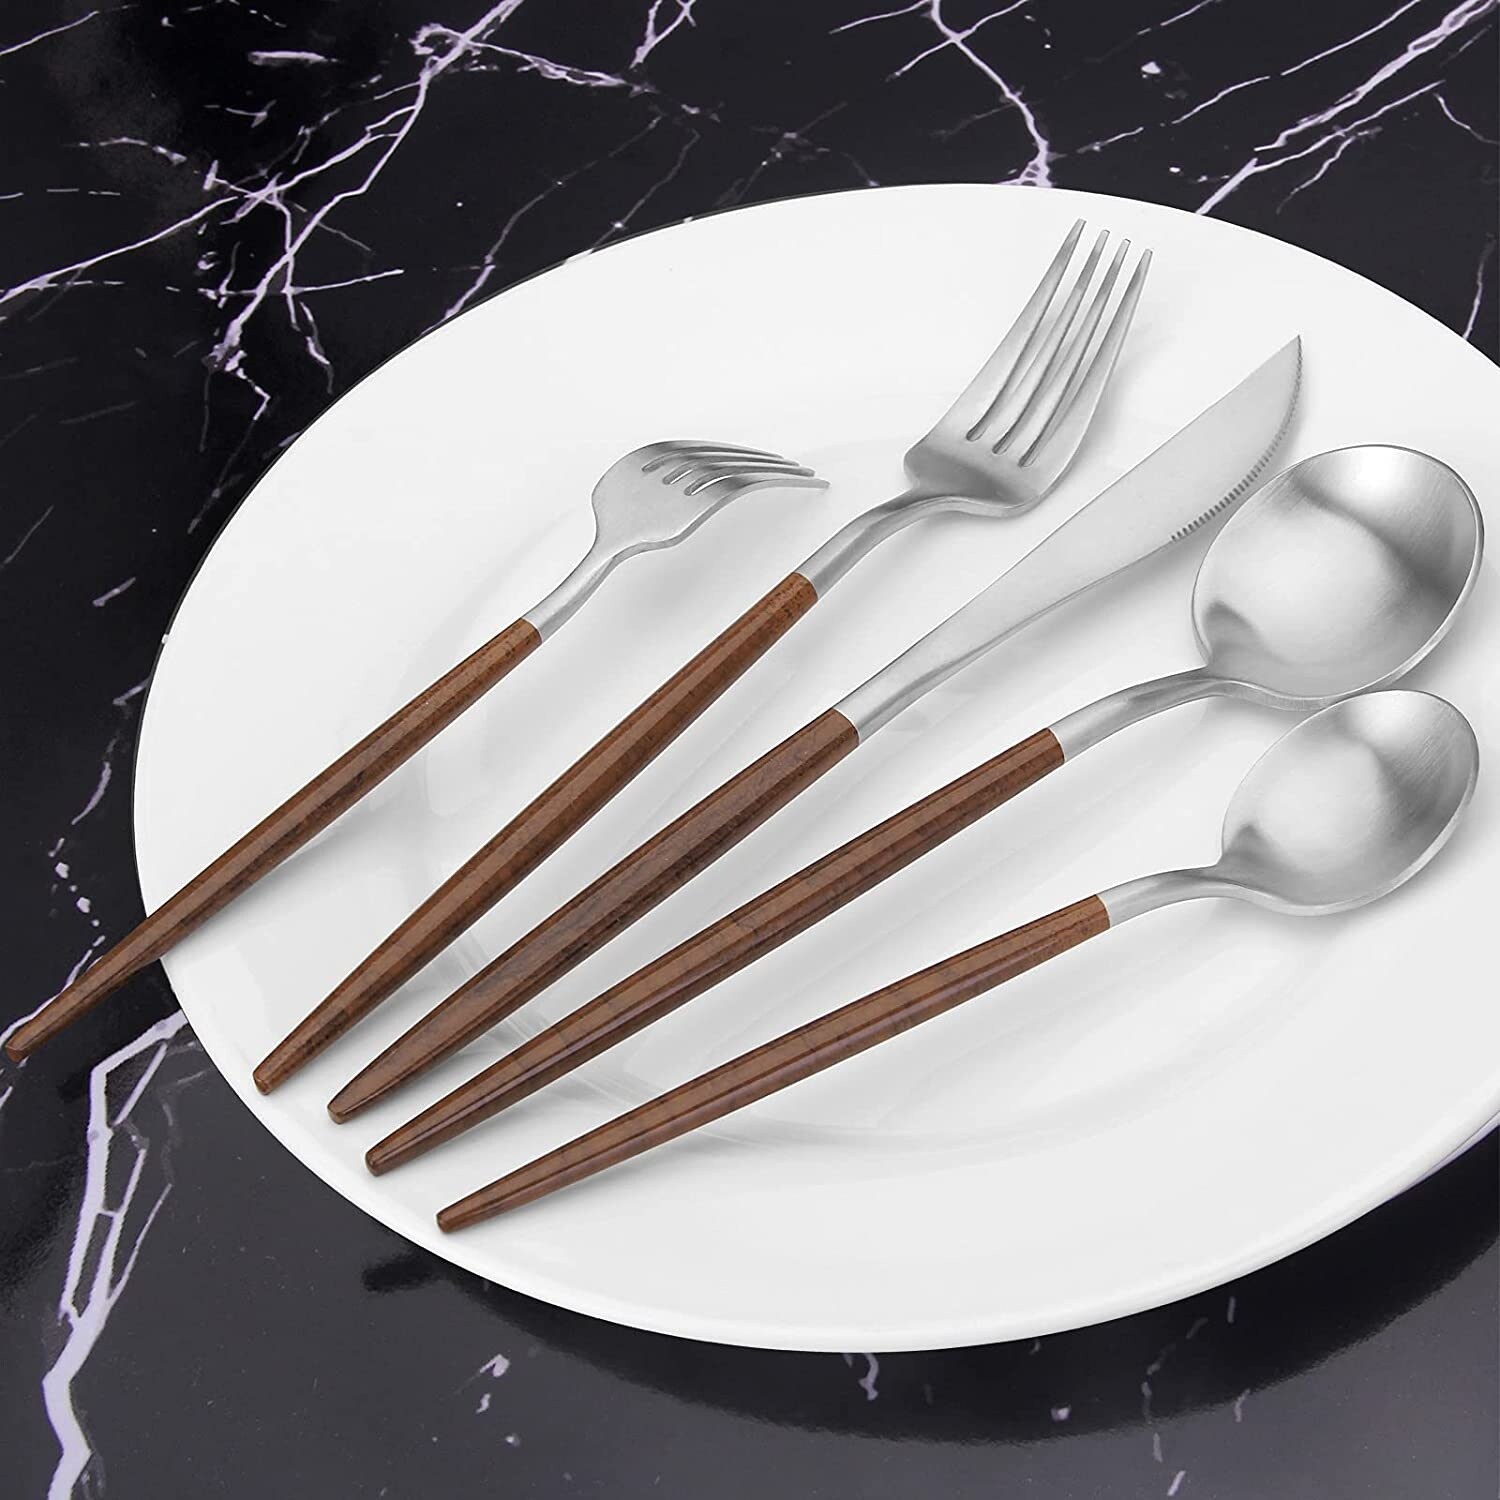 https://ak1.ostkcdn.com/images/products/is/images/direct/c200746e610788fca07166412fbfd7f092ddbe3a/Silverware-Set-with-black-handle%2C-Vanys-30-Piece-Stainless-Steel-Cutlery-Flatware-Set%2C-Kitchen-Utensil-Sets-for-6.jpg